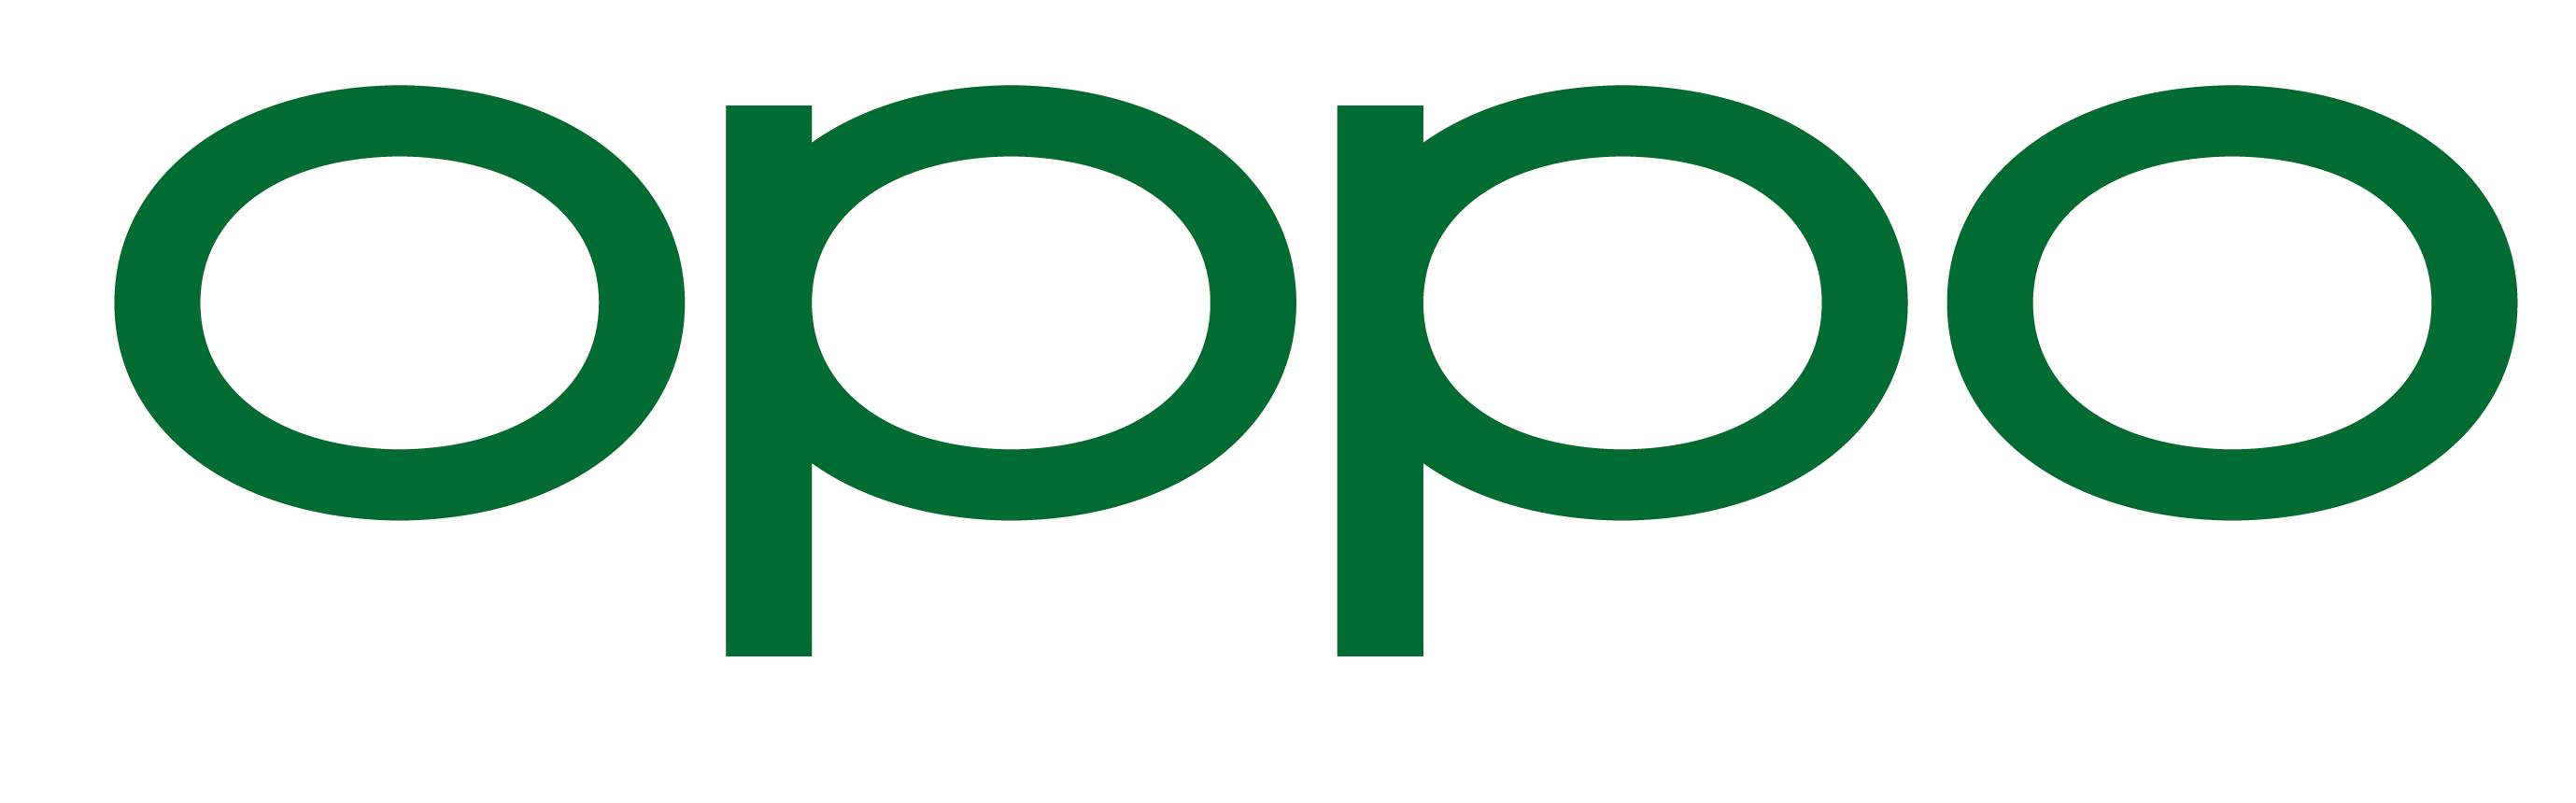 Oppo moves away from green in latest logo redesign - GSMArena.com news